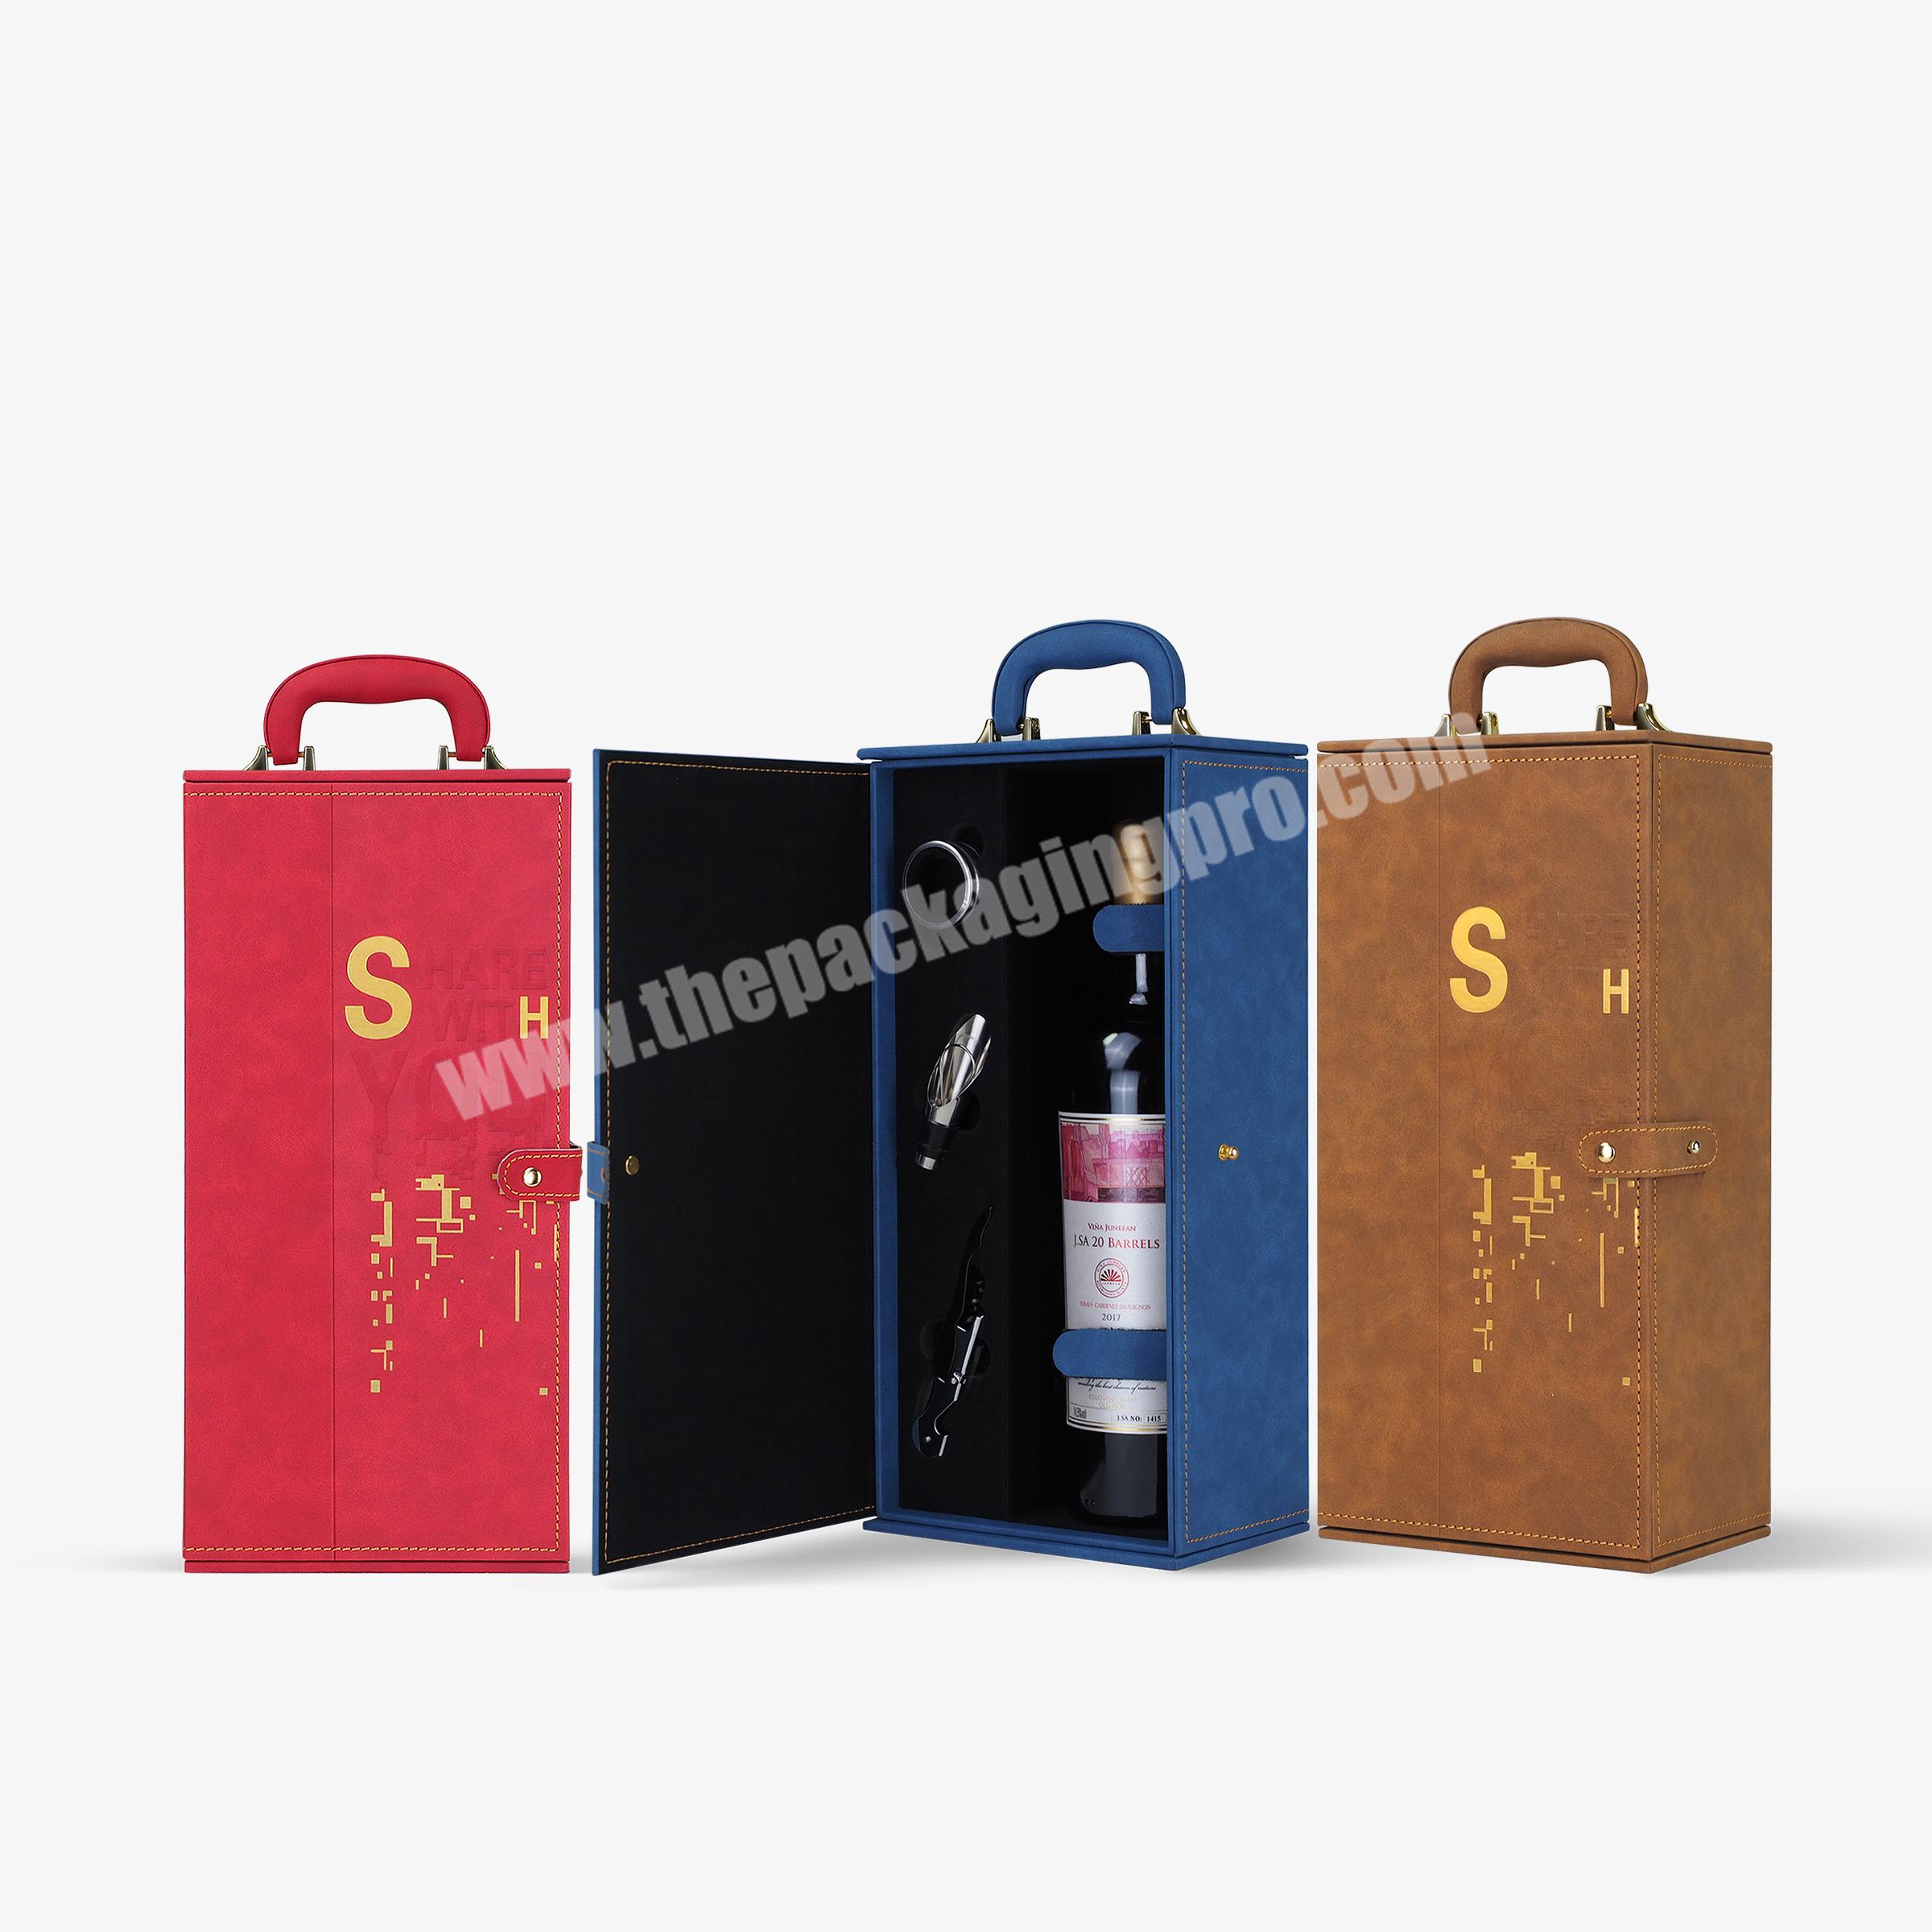 OEM luxury wine bottle boxes hot sale leather wine box wine packaging boxes